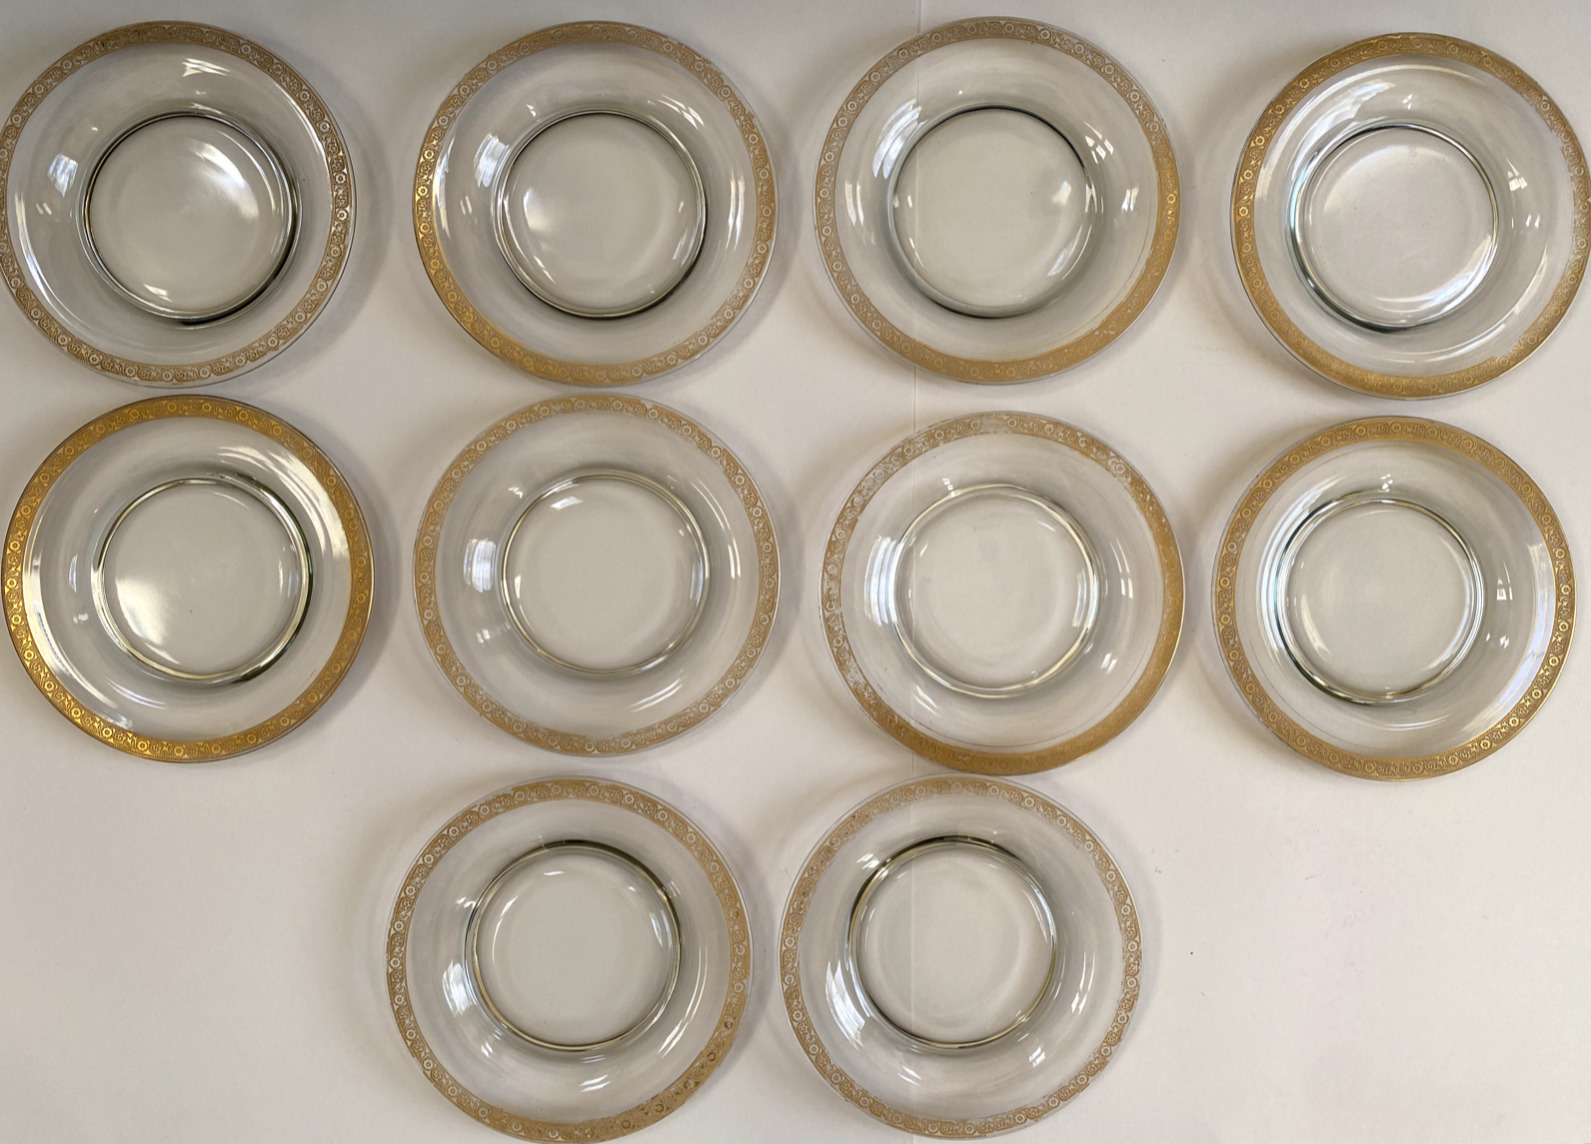 (Set of 10) Vintage Clear Glass Dishes w/Gold Rose Floral Encrusted Trim Plates,